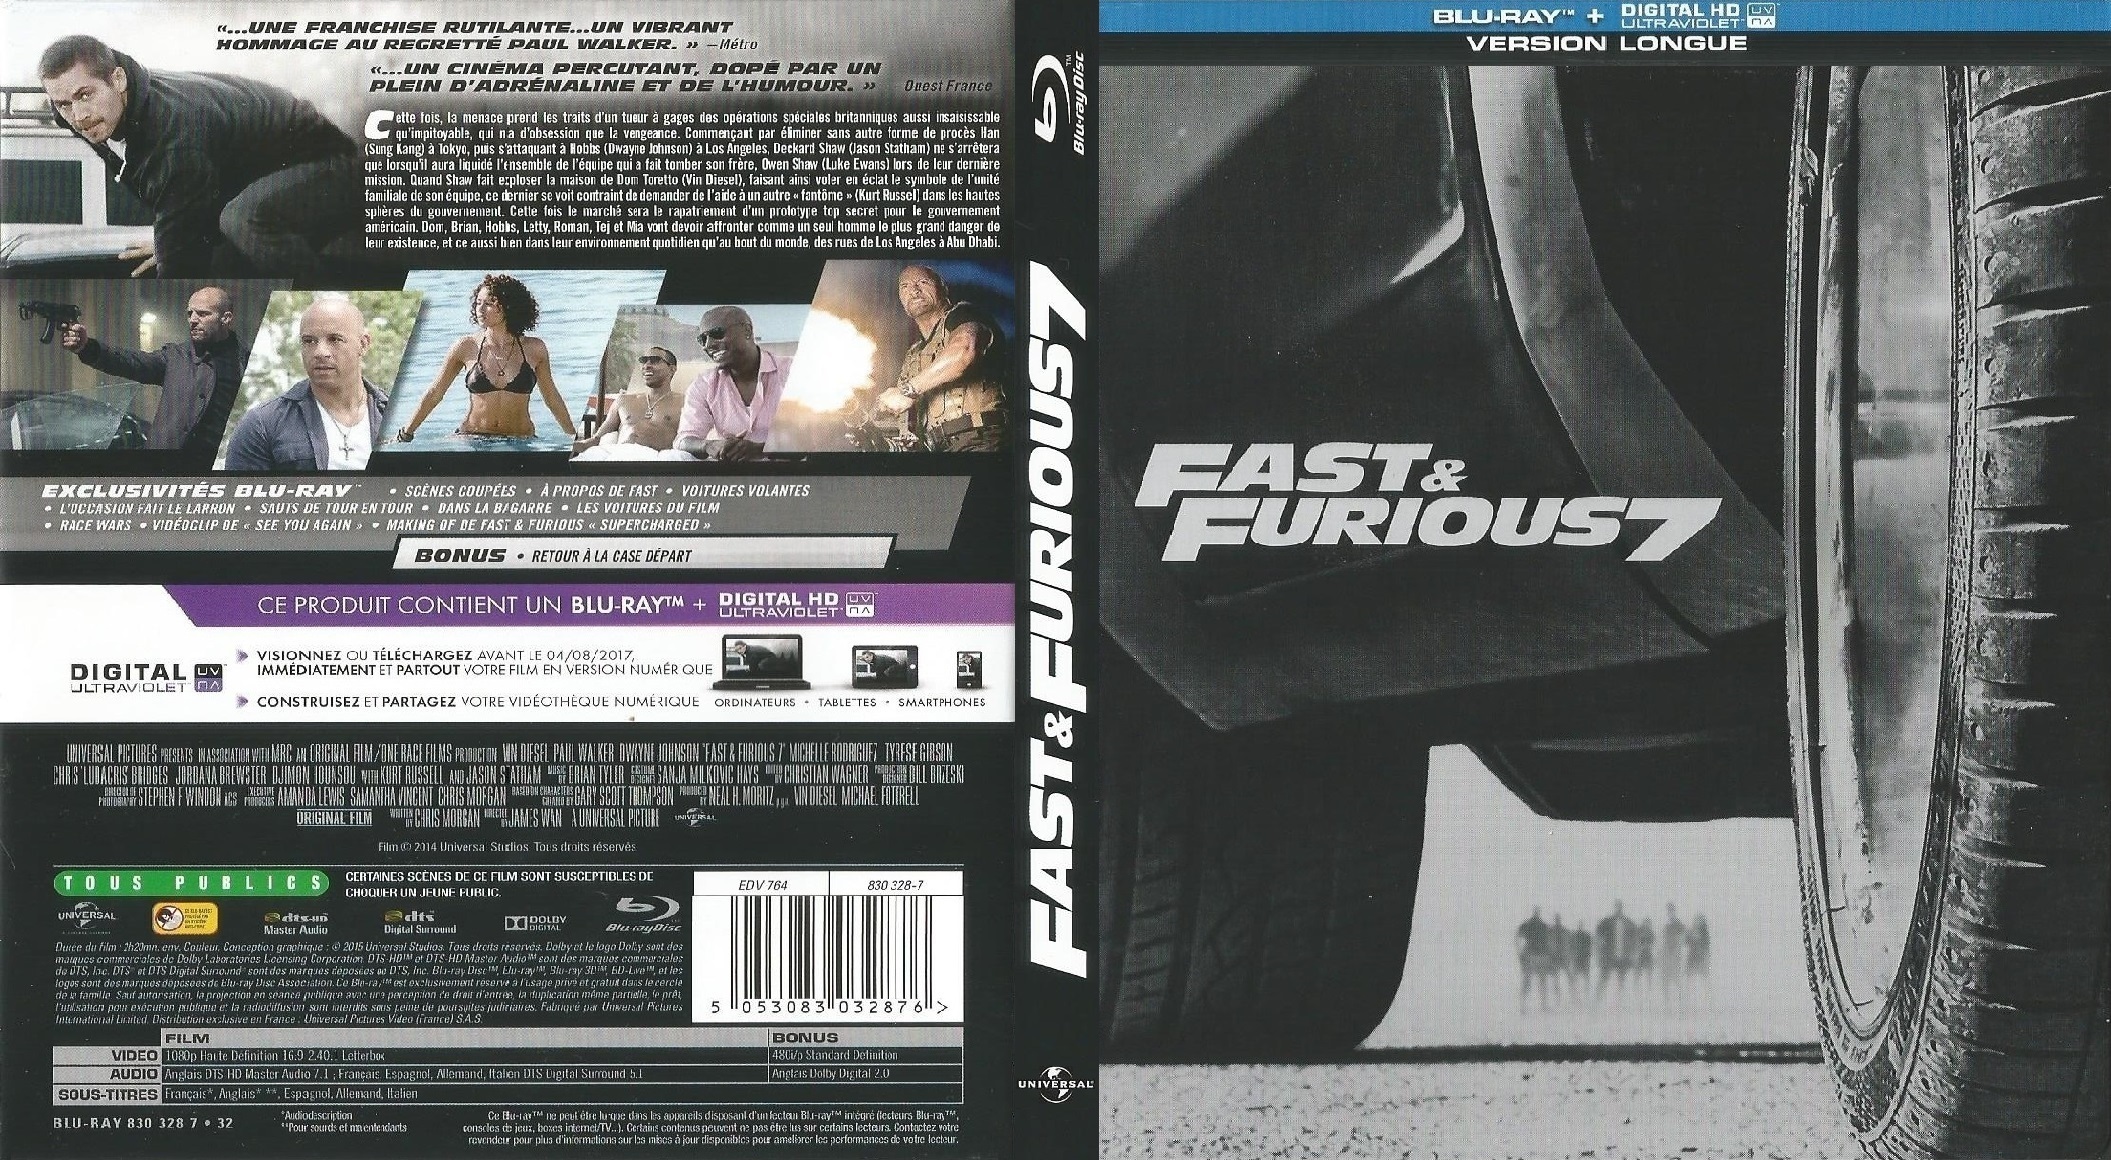 Jaquette DVD Fast & Furious 7 (BLU-RAY)